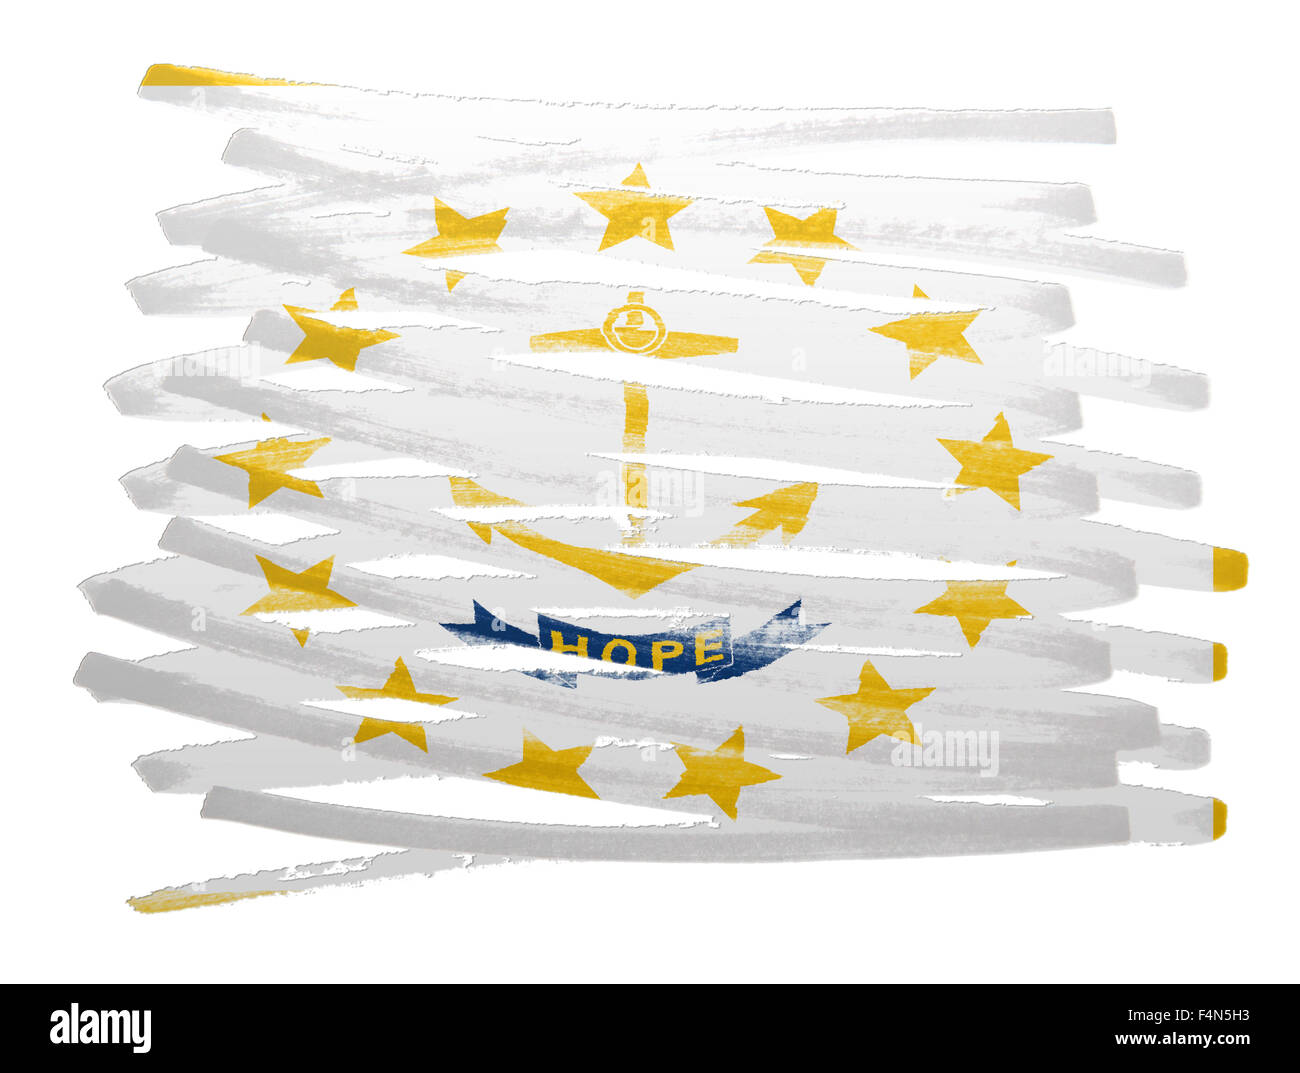 Flag illustration made with pen - Rhode Island Stock Photo